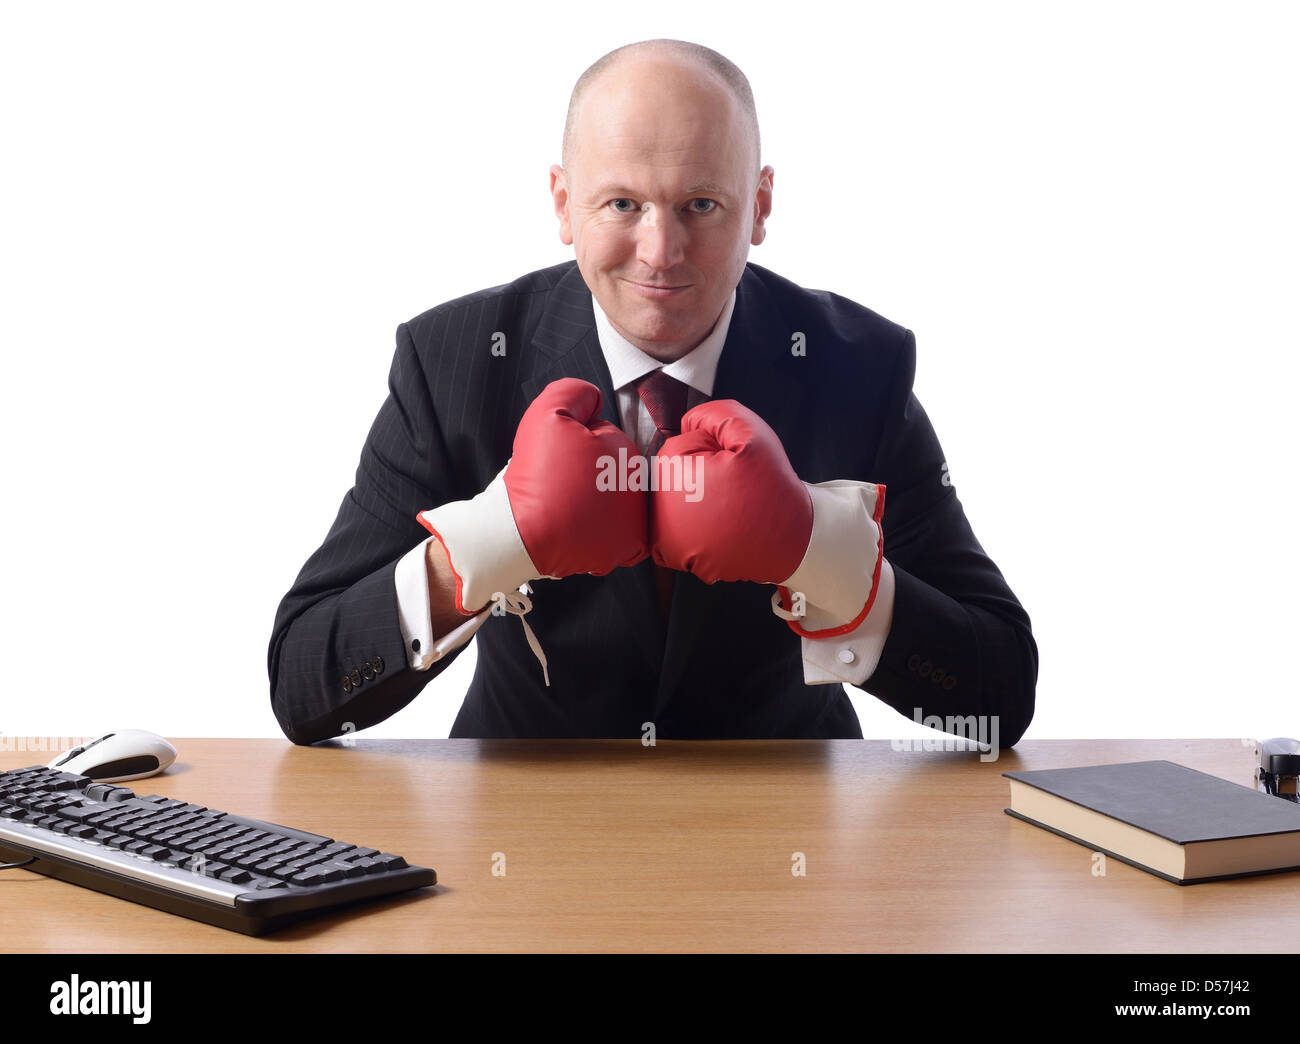 Stock image of person wearing business suit and boxing gloves isolated on white Stock Photo